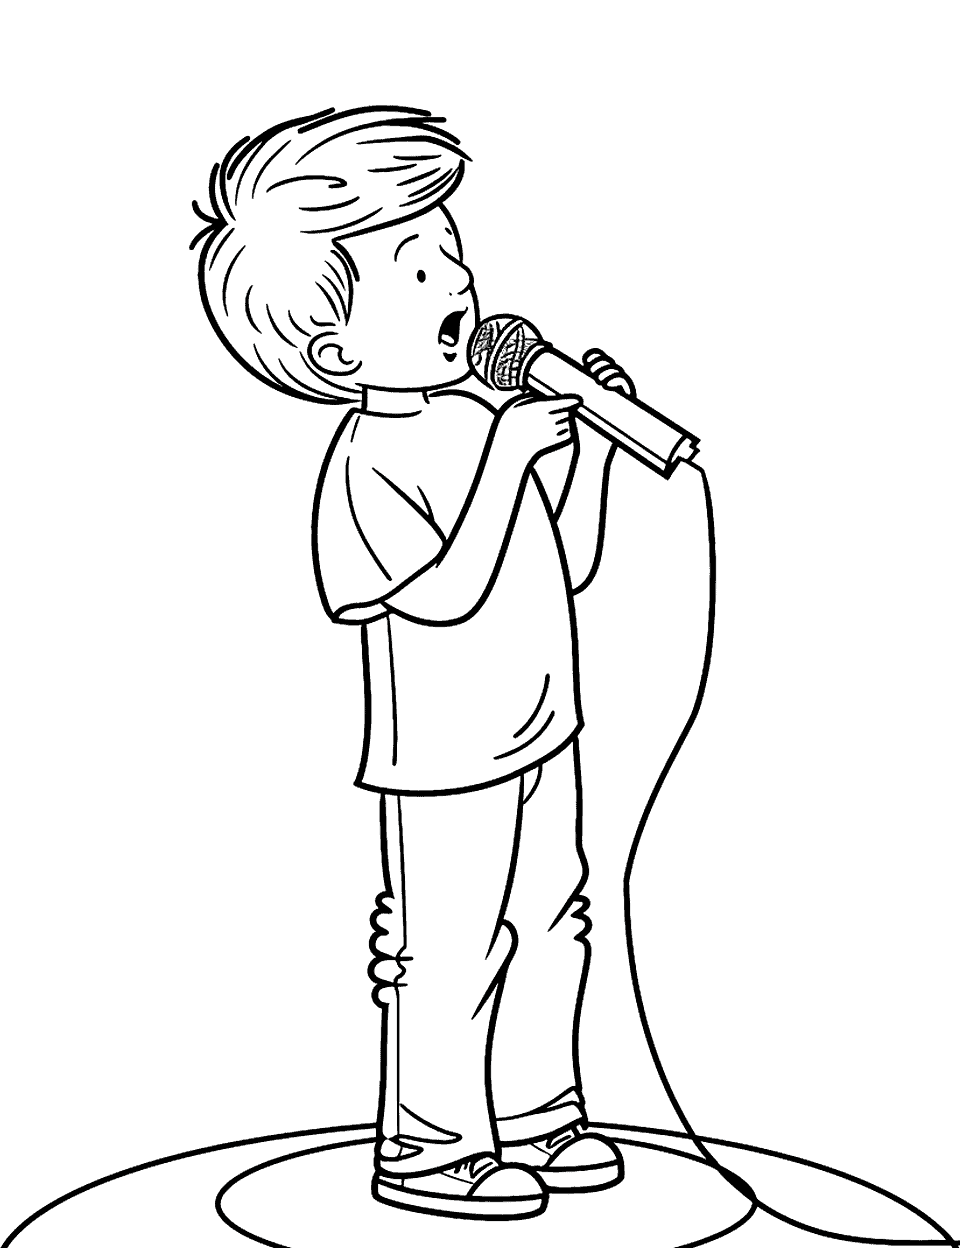 Audition Day Music Coloring Page - A nervous boy holding a microphone, standing on a small stage in a school auditorium.